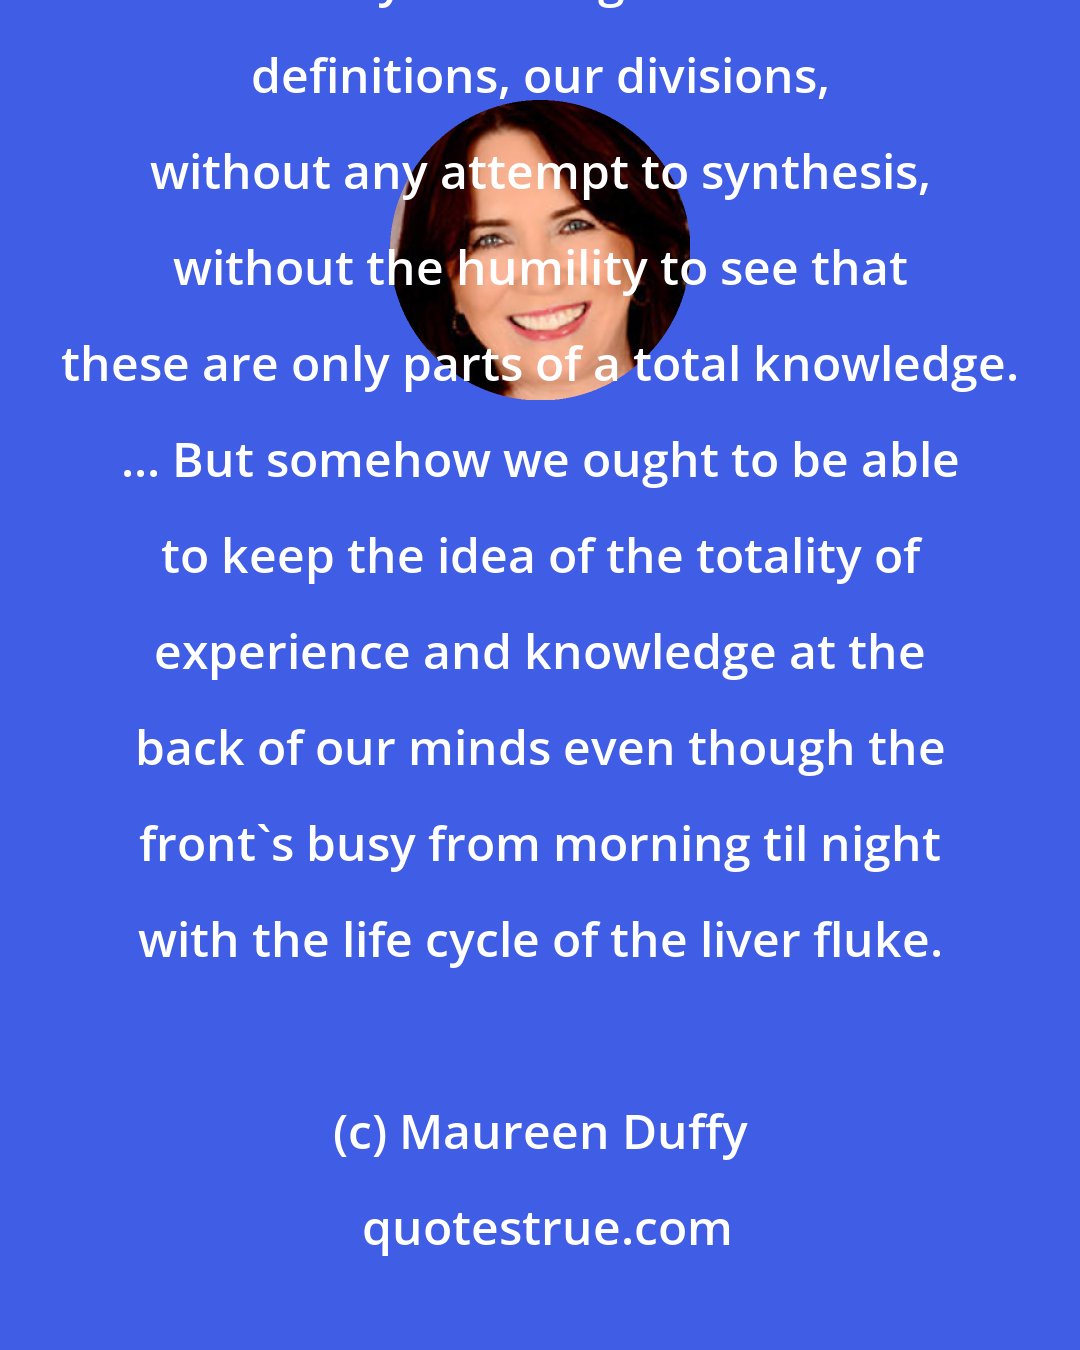 Maureen Duffy: We develop all our sciences, archeology, cosmology, psychology, we tabulate and classify and cling to our sacred definitions, our divisions, without any attempt to synthesis, without the humility to see that these are only parts of a total knowledge. ... But somehow we ought to be able to keep the idea of the totality of experience and knowledge at the back of our minds even though the front's busy from morning til night with the life cycle of the liver fluke.